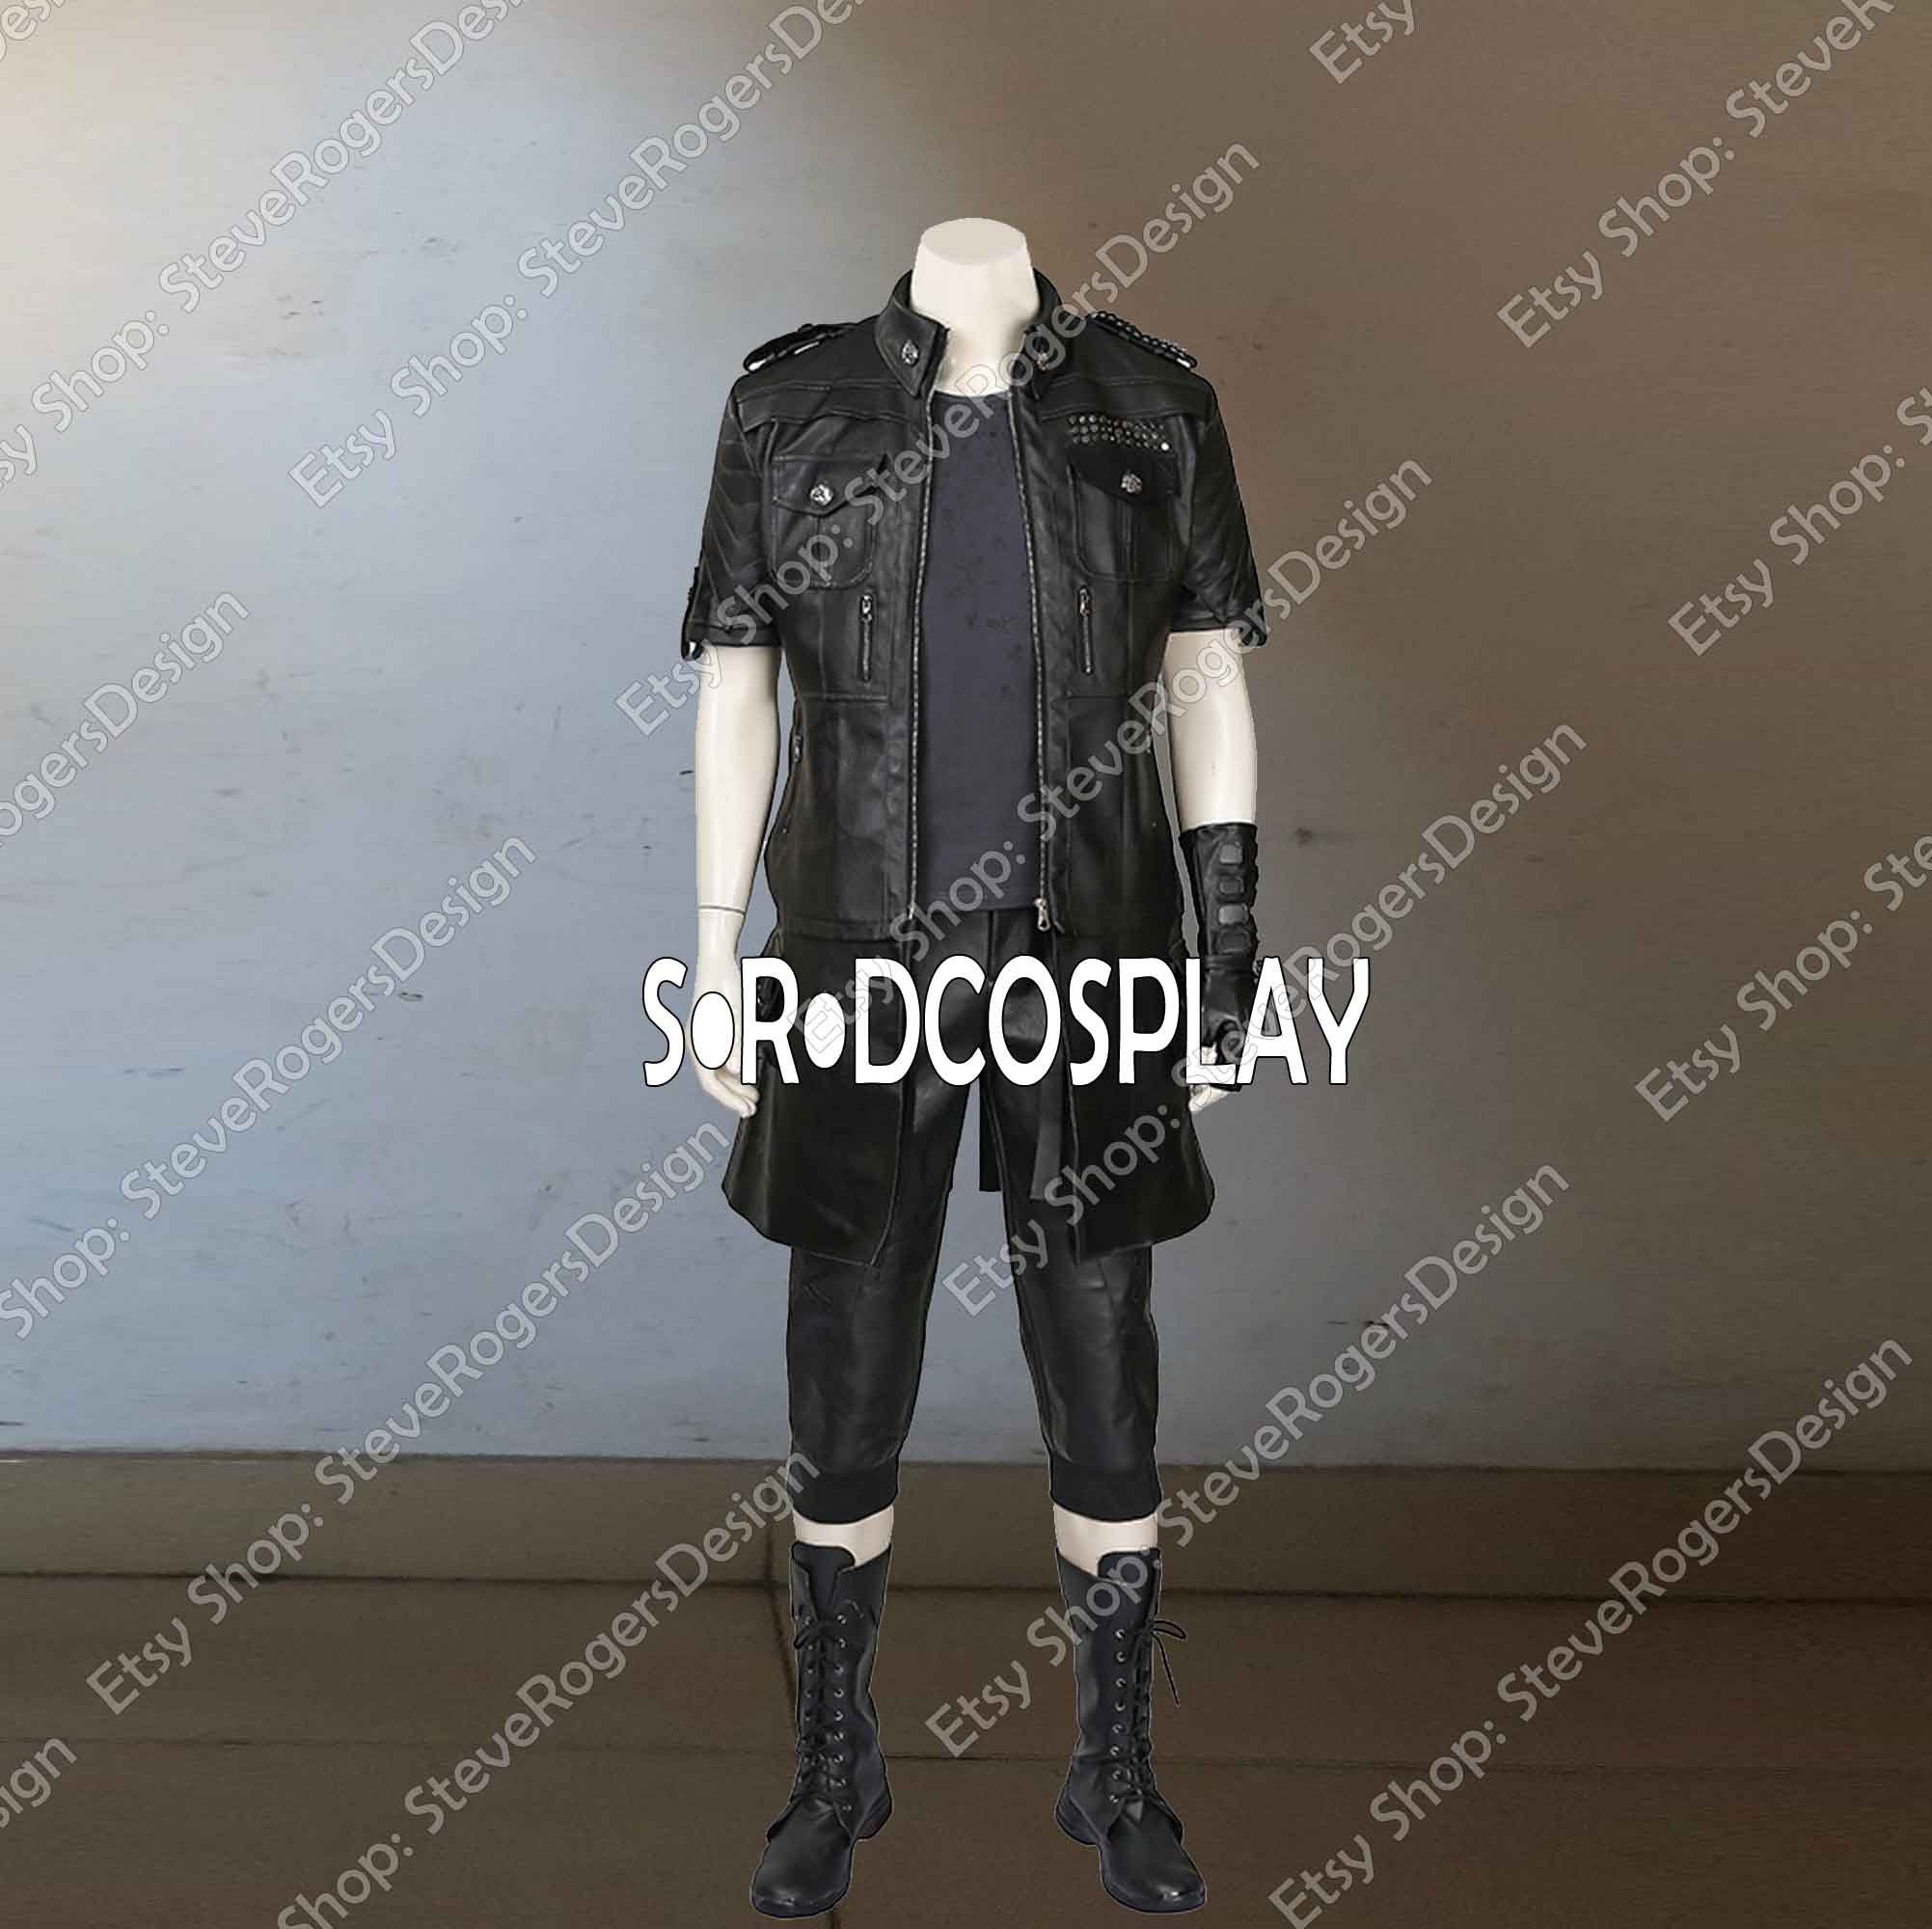 Final Fantasy 15 Cosplay Costume Outfit Noctis Lucis Caelum - Etsy